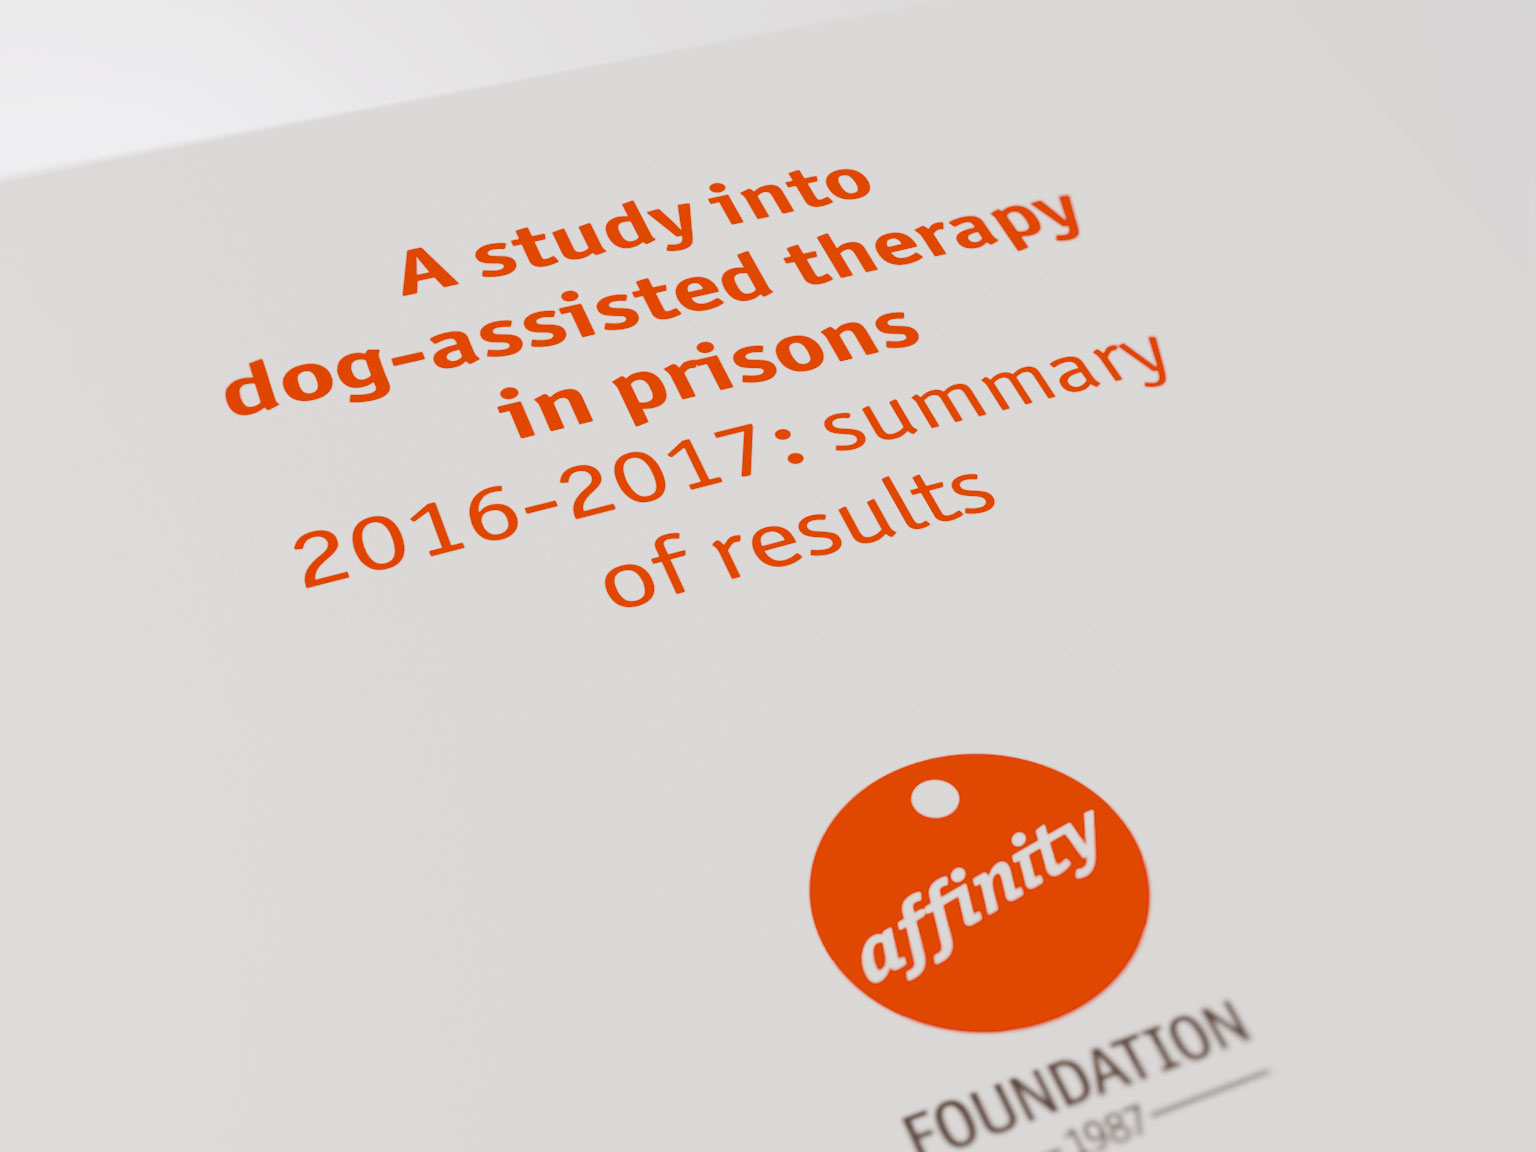 A study into dog-assisted therapy in prisons 2016-2017: summary of results